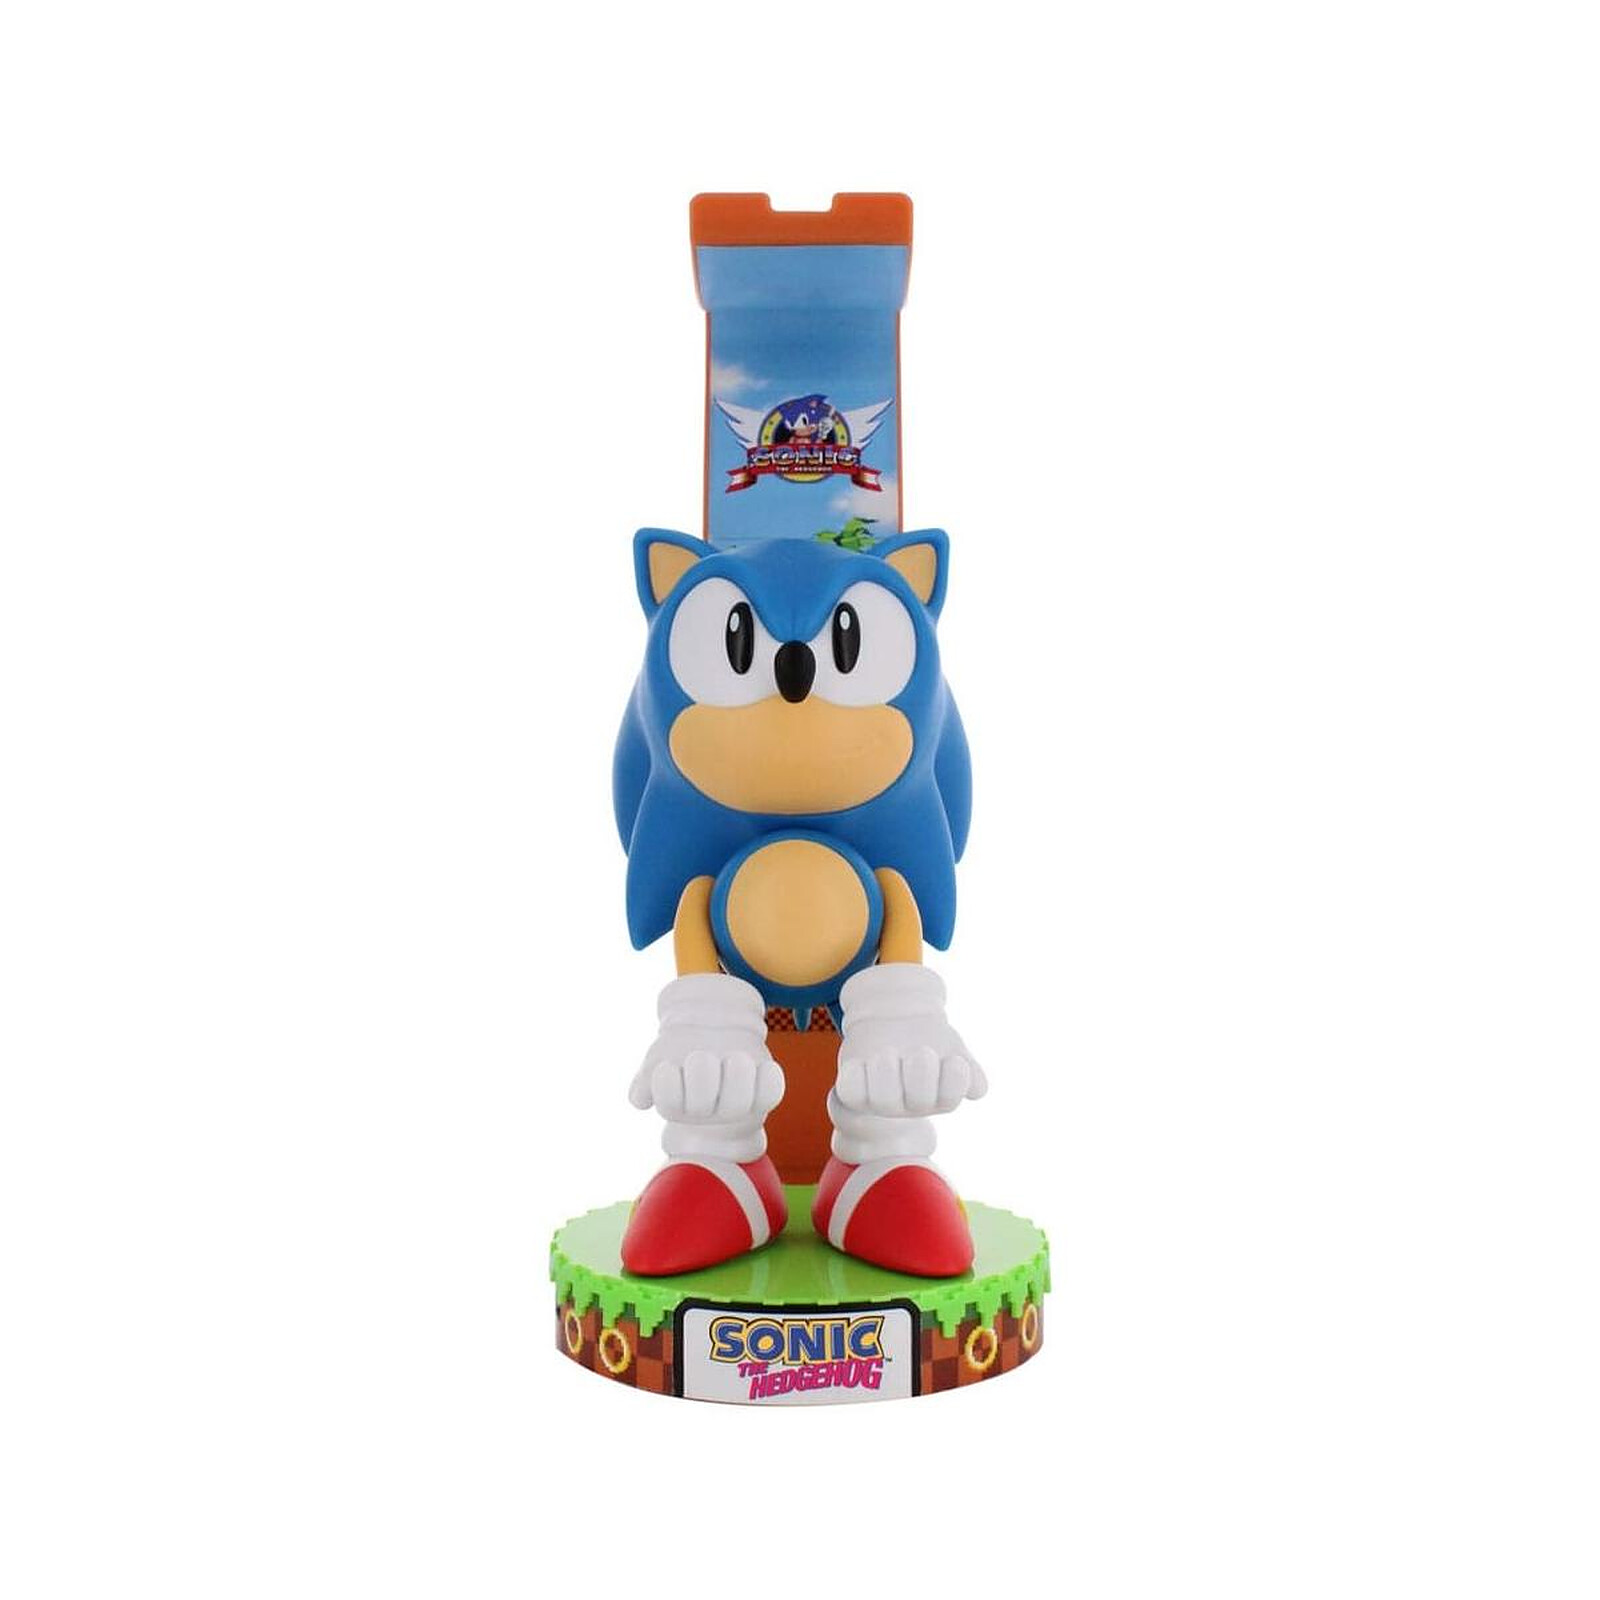 Sonic The Hedgehog - Figurine Cable Deluxe Sonic 20 cm - Figurines - LDLC